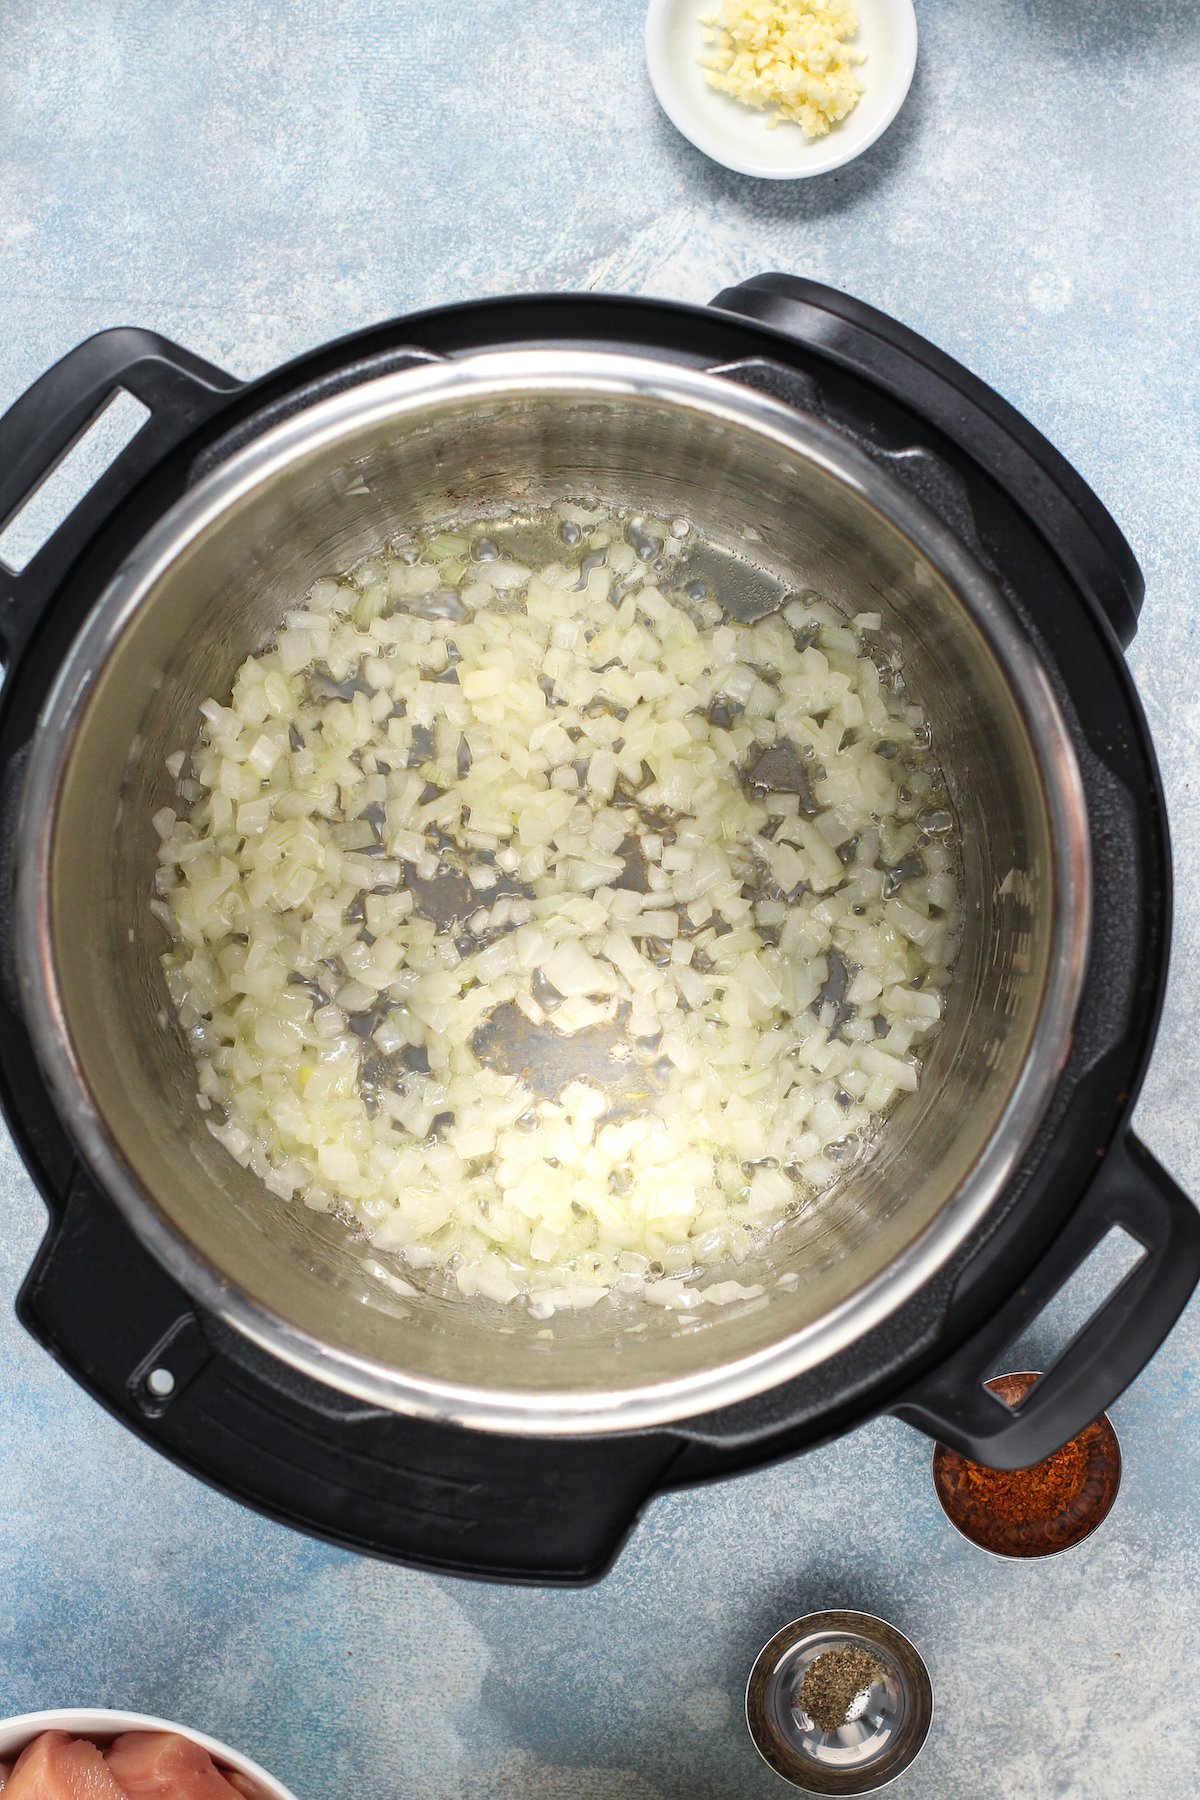 Onions and garlic in an Instant Pot.